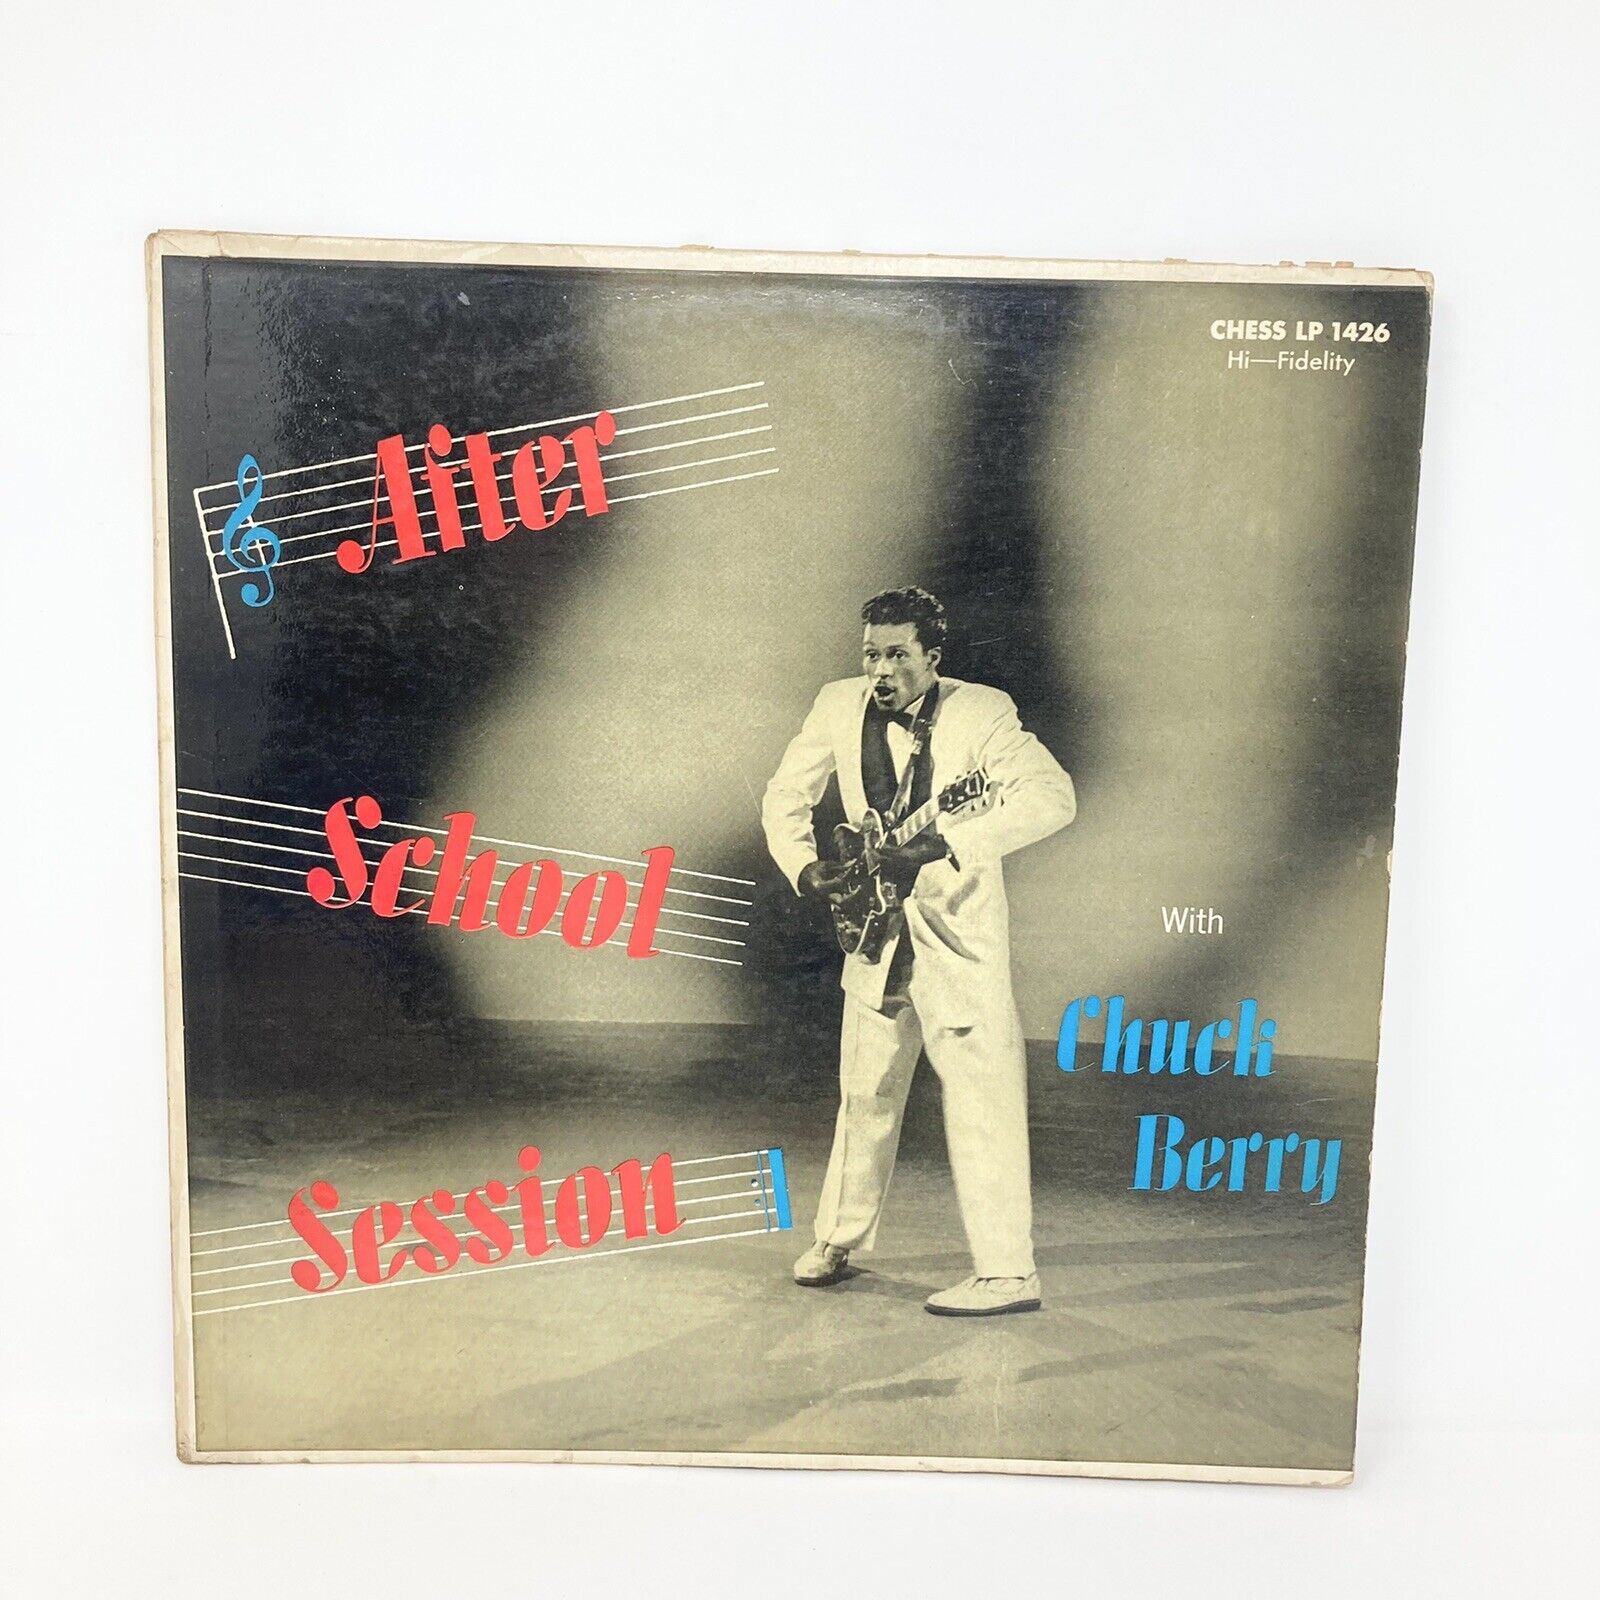 Vintage Chuck Berry: After School Session LP Vinyl Record Chess 1426